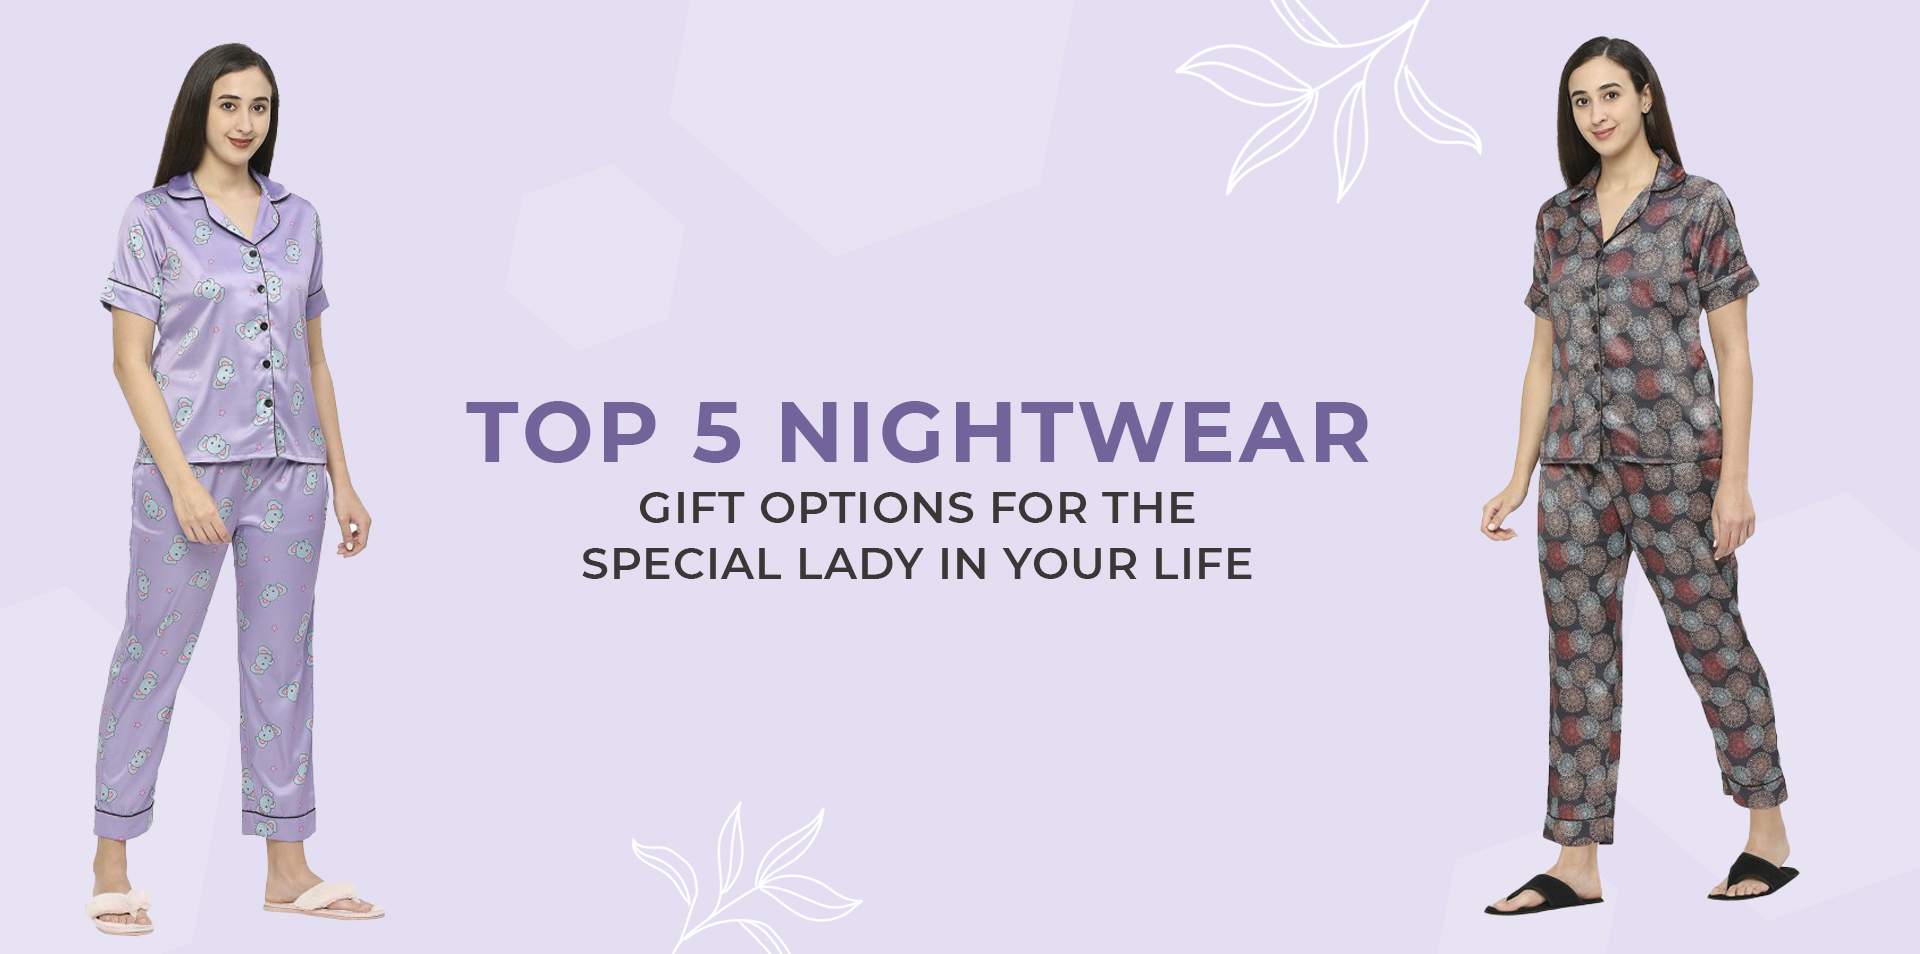 Top 5 Nightwear Gift Options for the Special Lady in Your Life